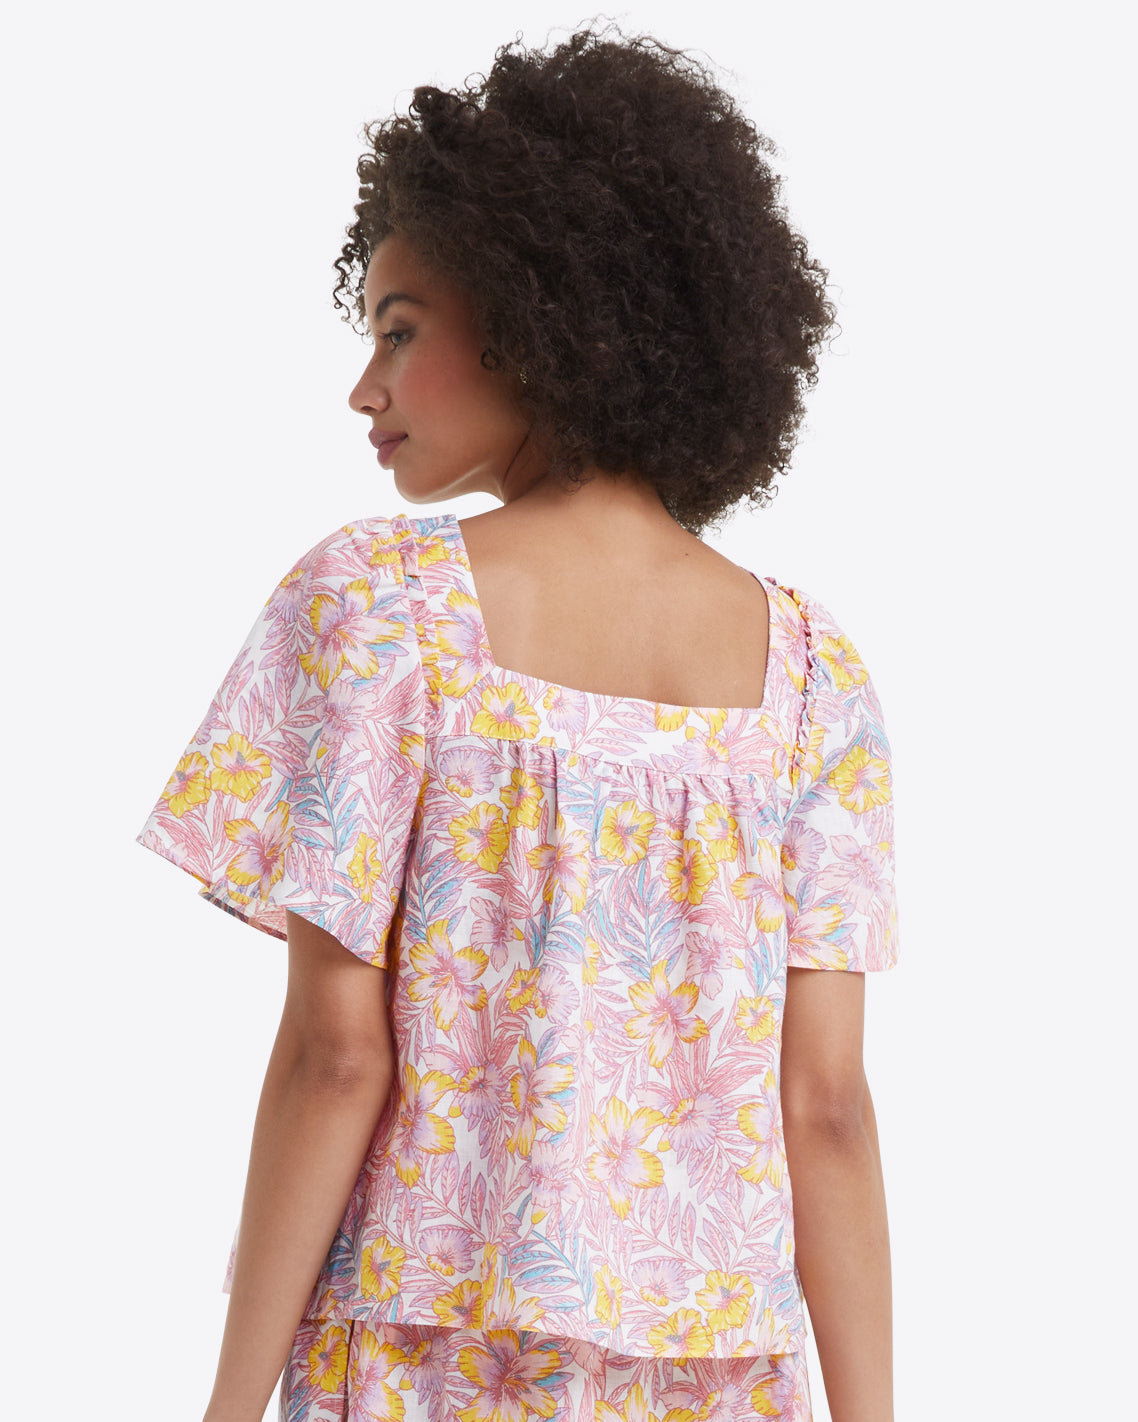 Maren Top in Lily Floral